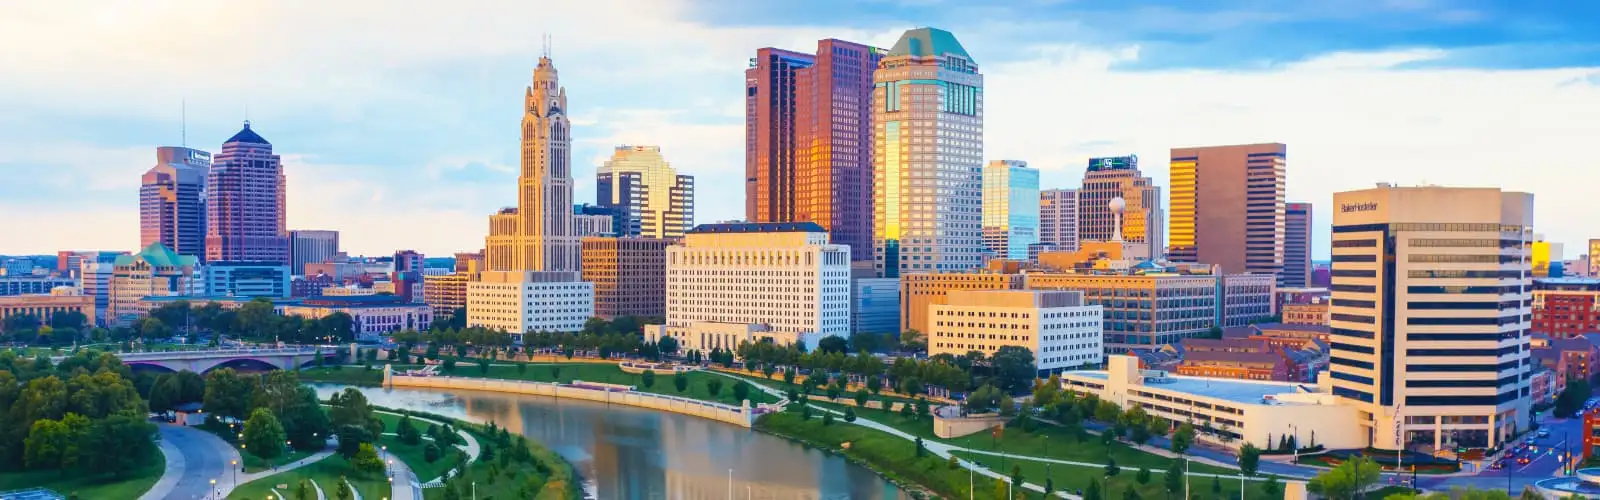 Aerial view of Downtown Columbus Ohio with Scioto river during sunset. Find Ohio insurance.